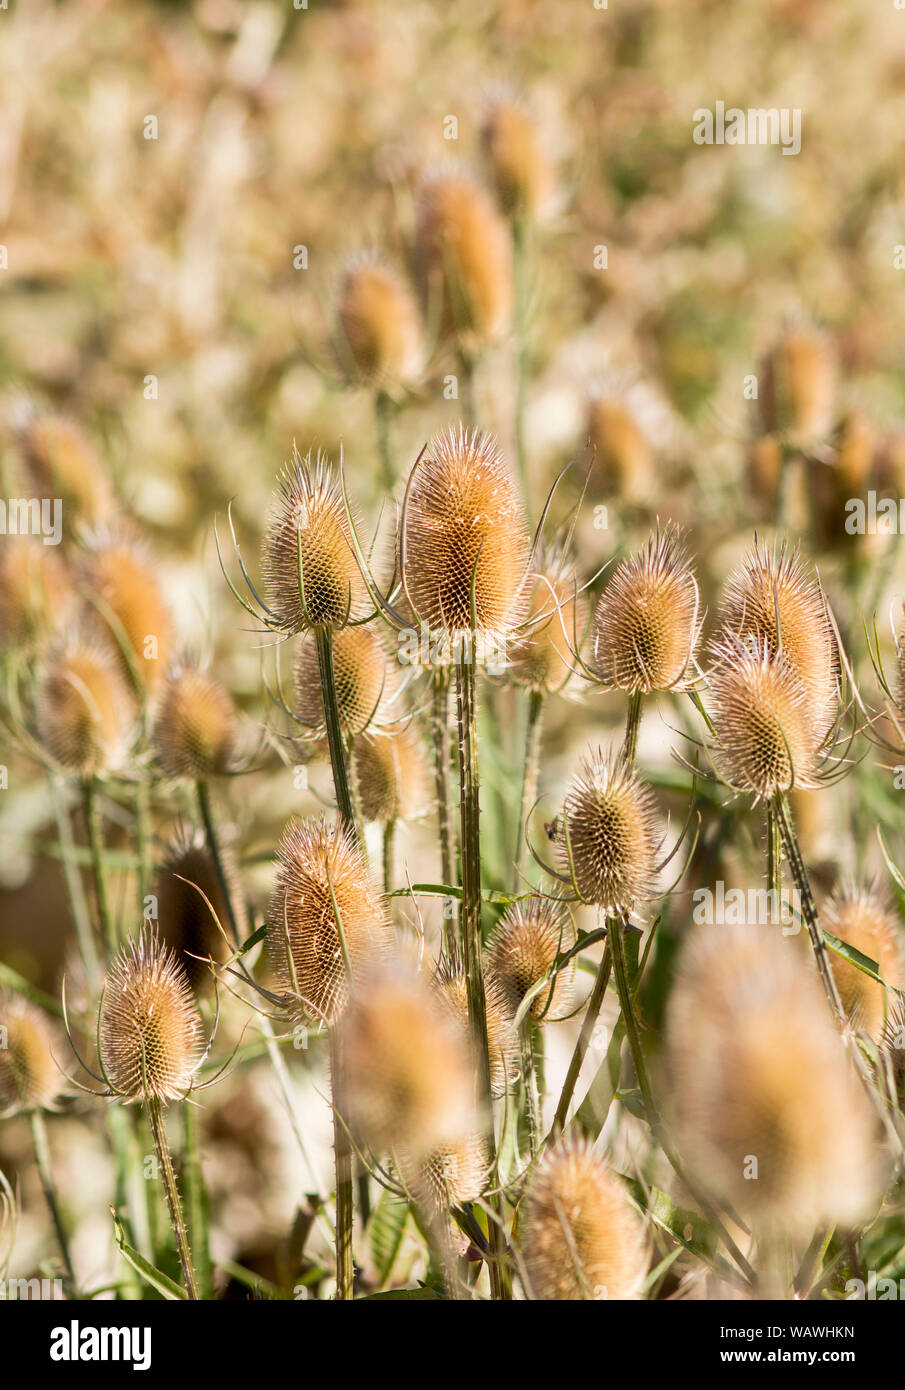 Dry seed pods of Indian Teasel, Dipsacus sativus, flower head. Stock Photo